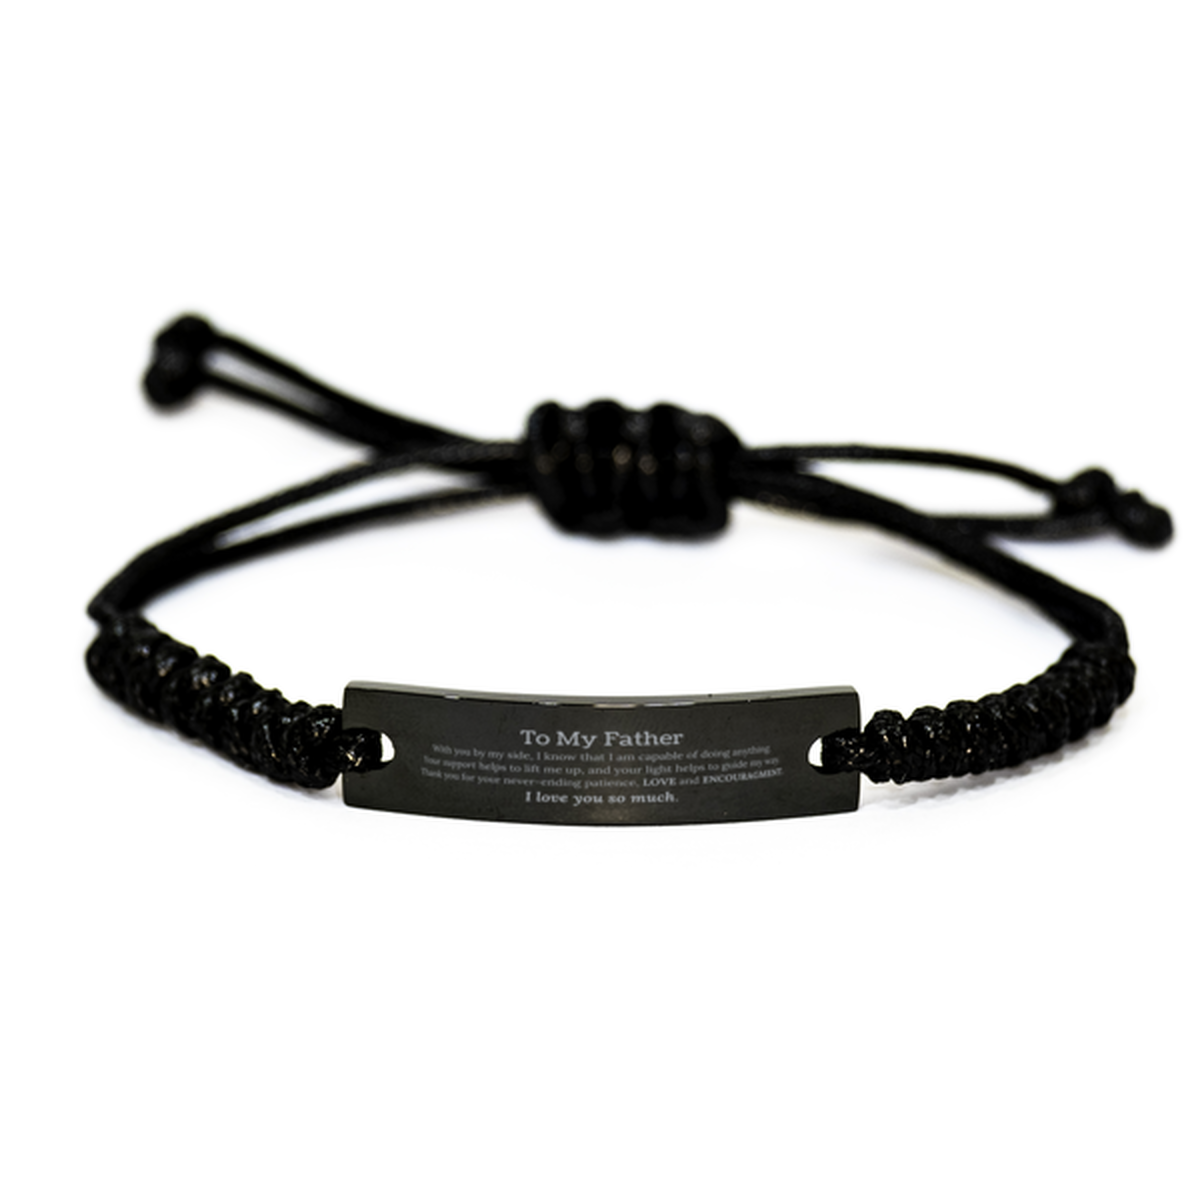 Appreciation Father Black Rope Bracelet Gifts, To My Father Birthday Christmas Wedding Keepsake Gifts for Father With you by my side, I know that I am capable of doing anything. I love you so much